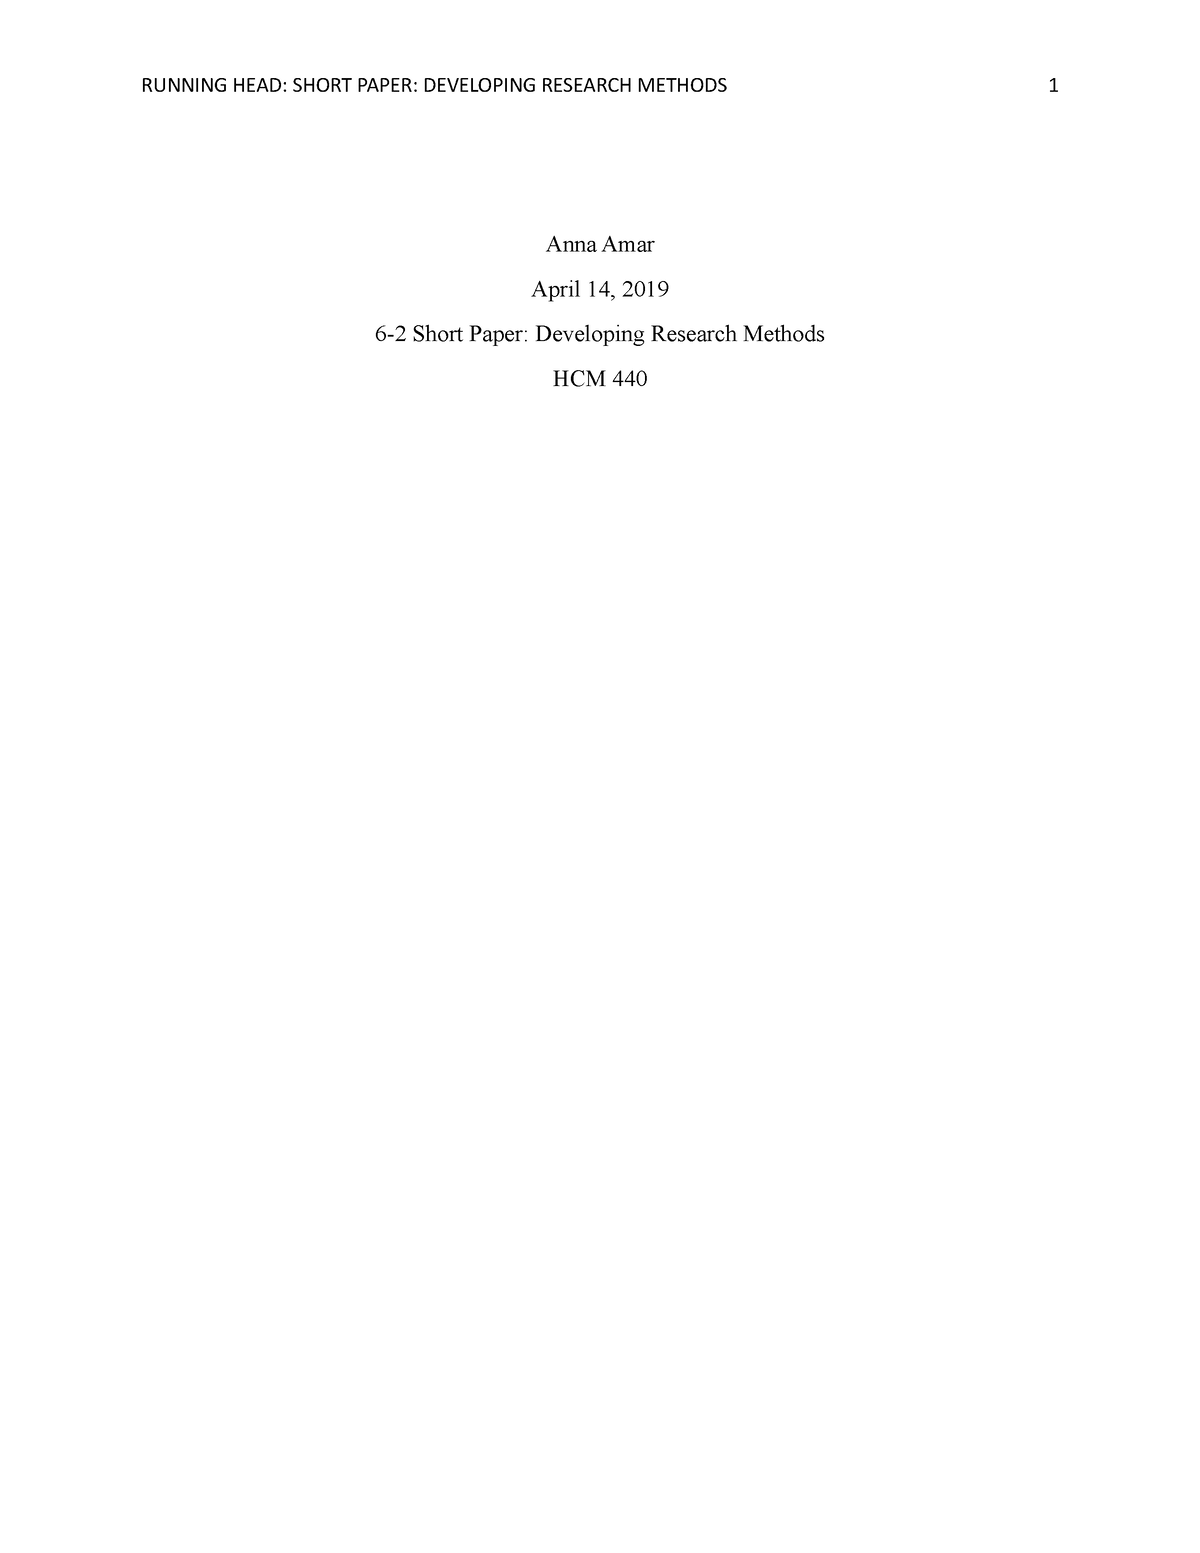 Revision HCM 440 6-2 Short Paper Methods OF Research - RUNNING HEAD ...